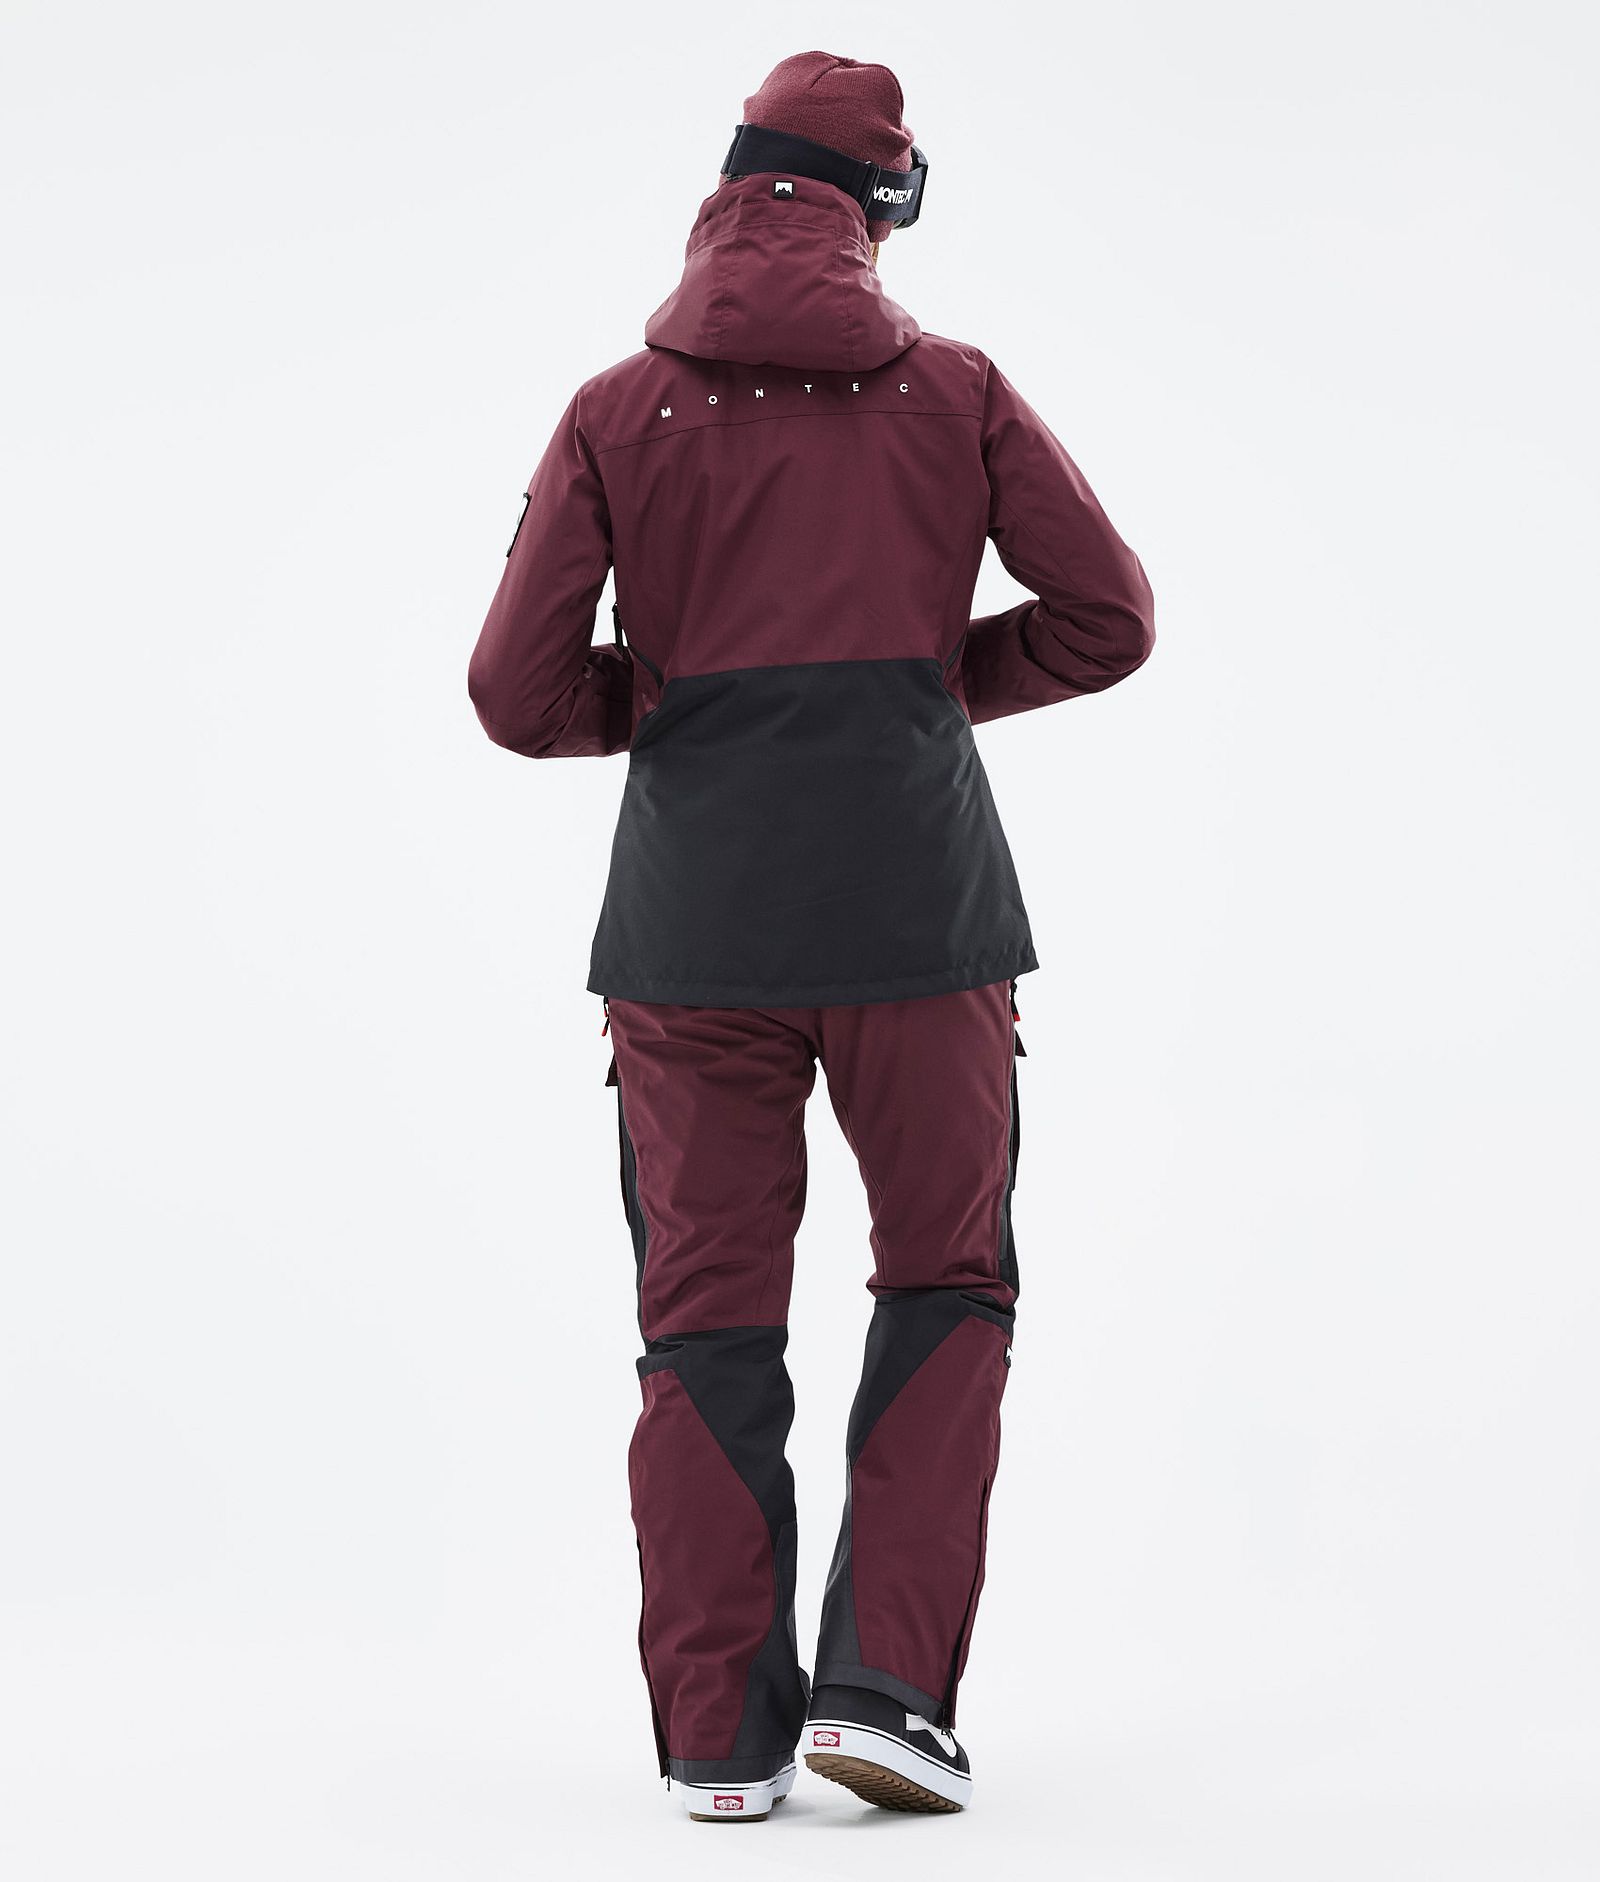 Moss W Snowboard Outfit Damen Burgundy/Black, Image 2 of 2